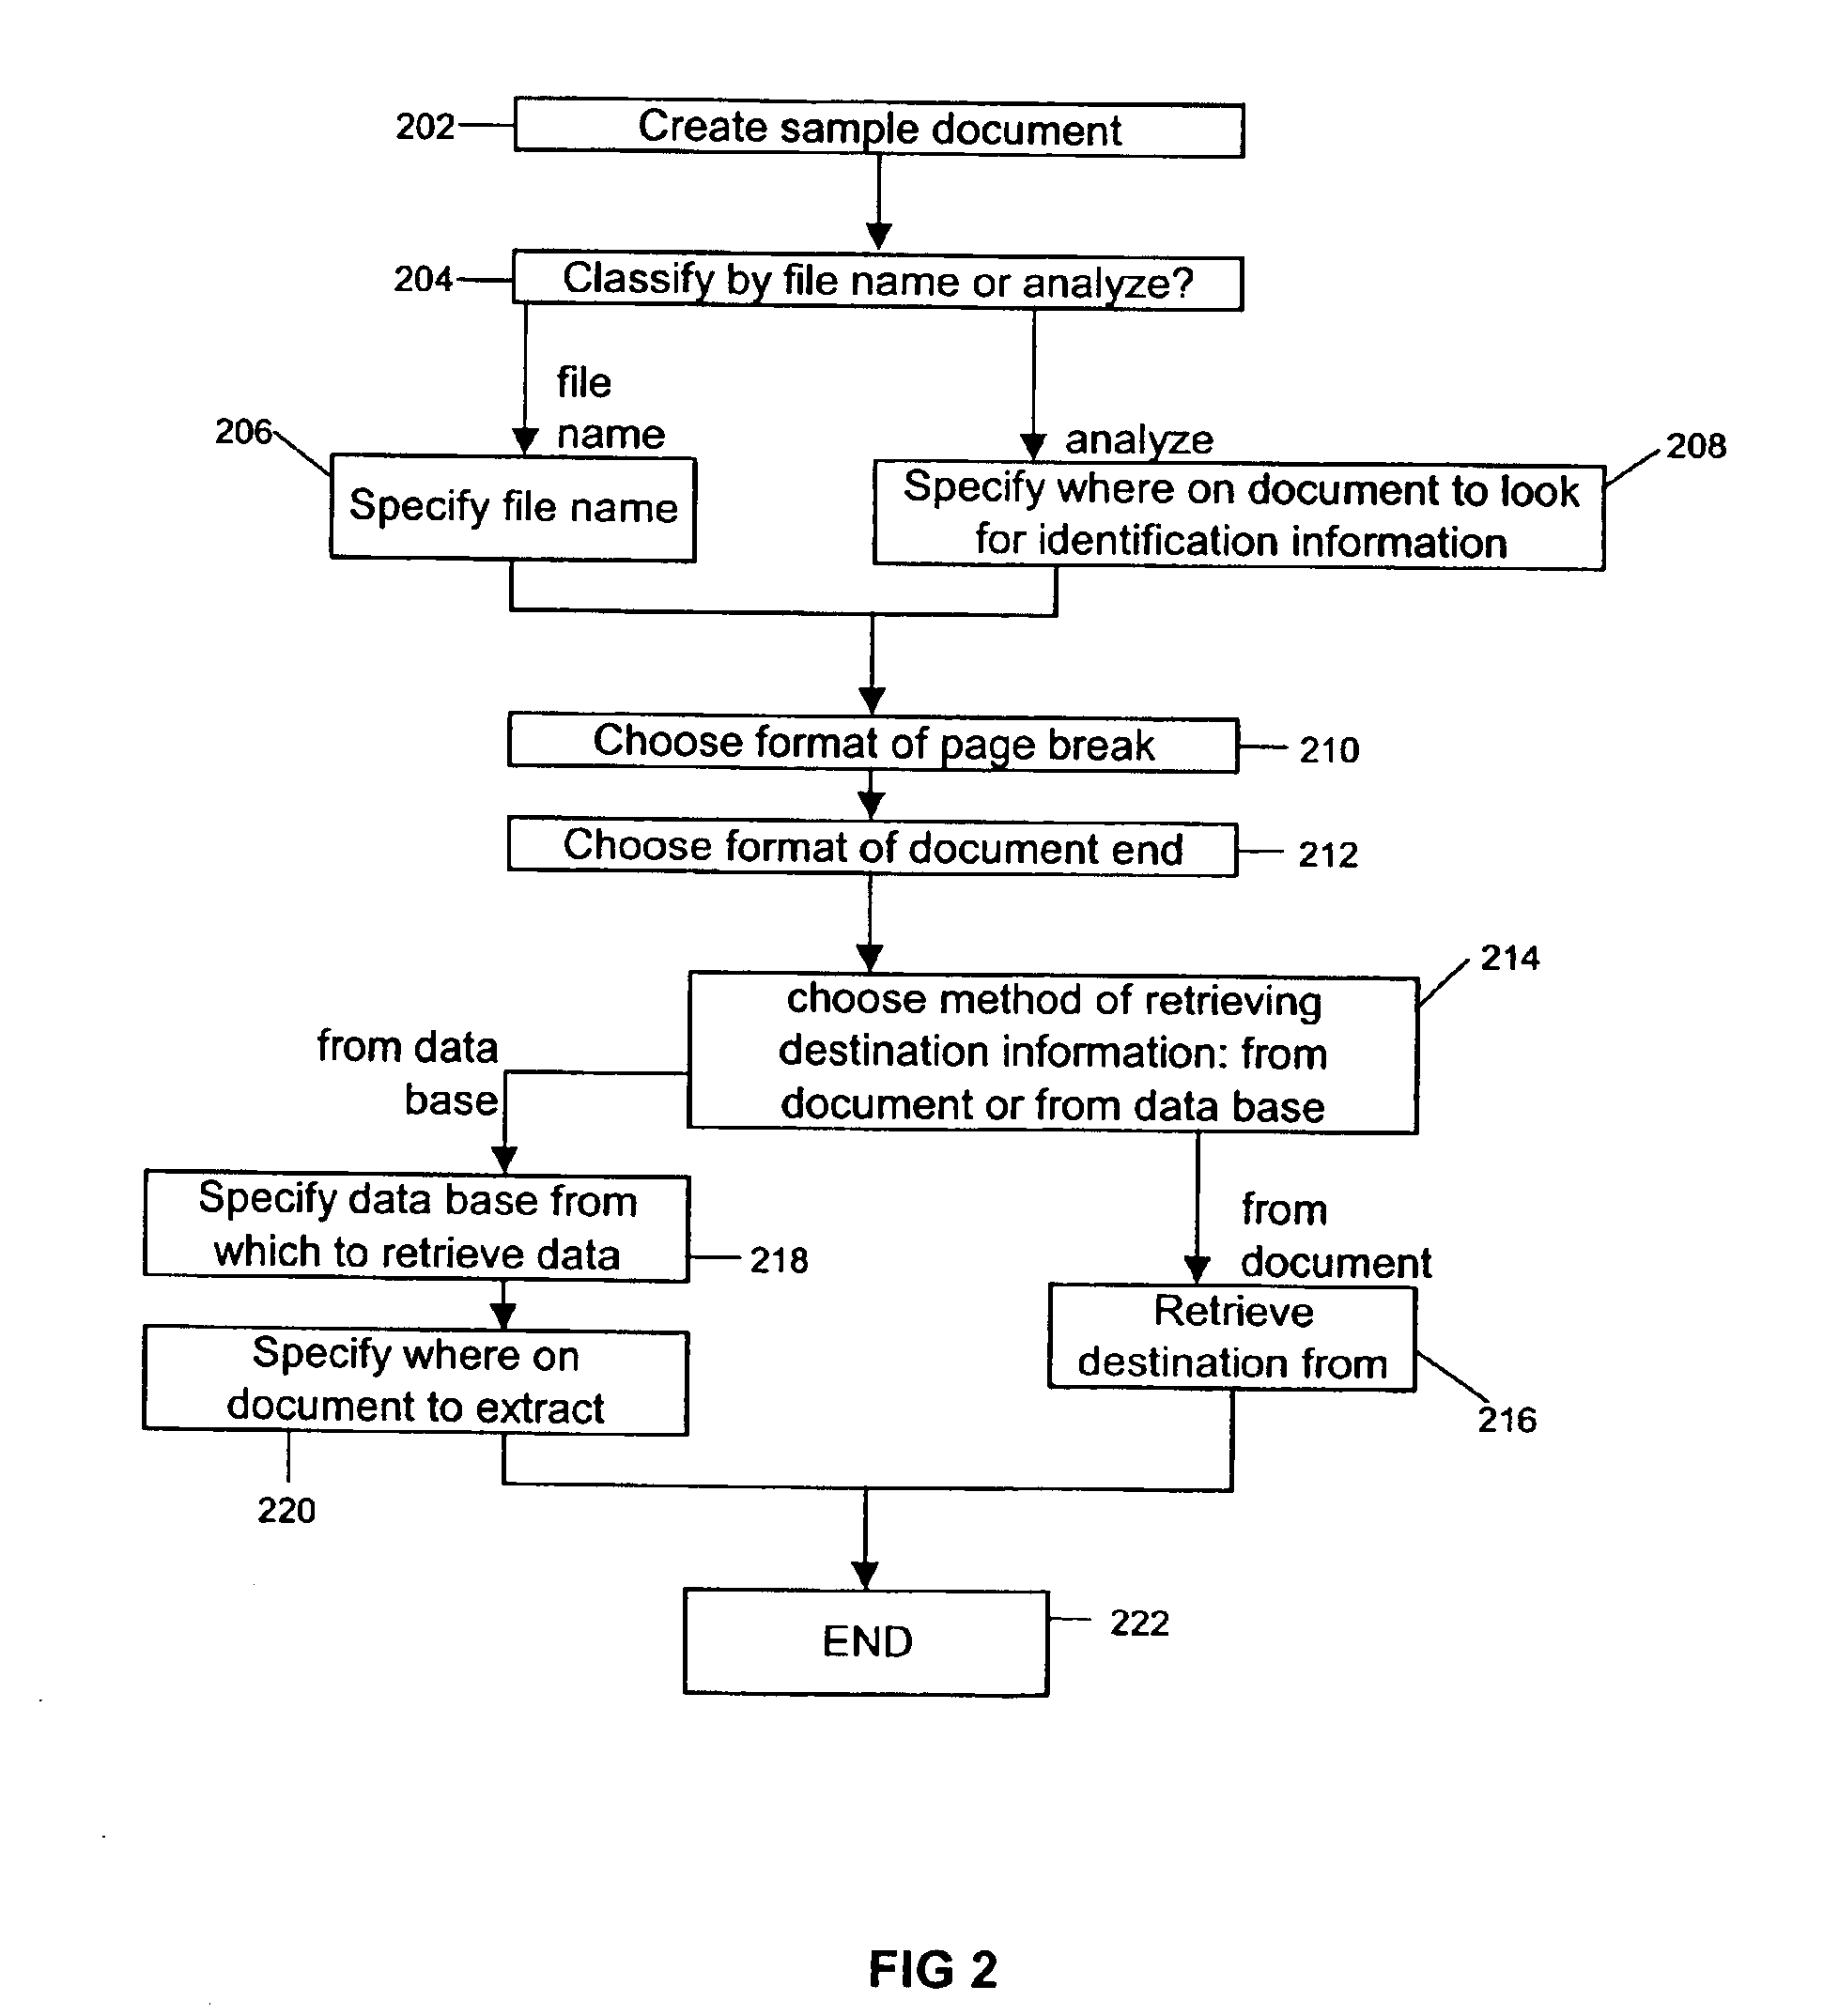 Network system for directing the transmission of facsimiles